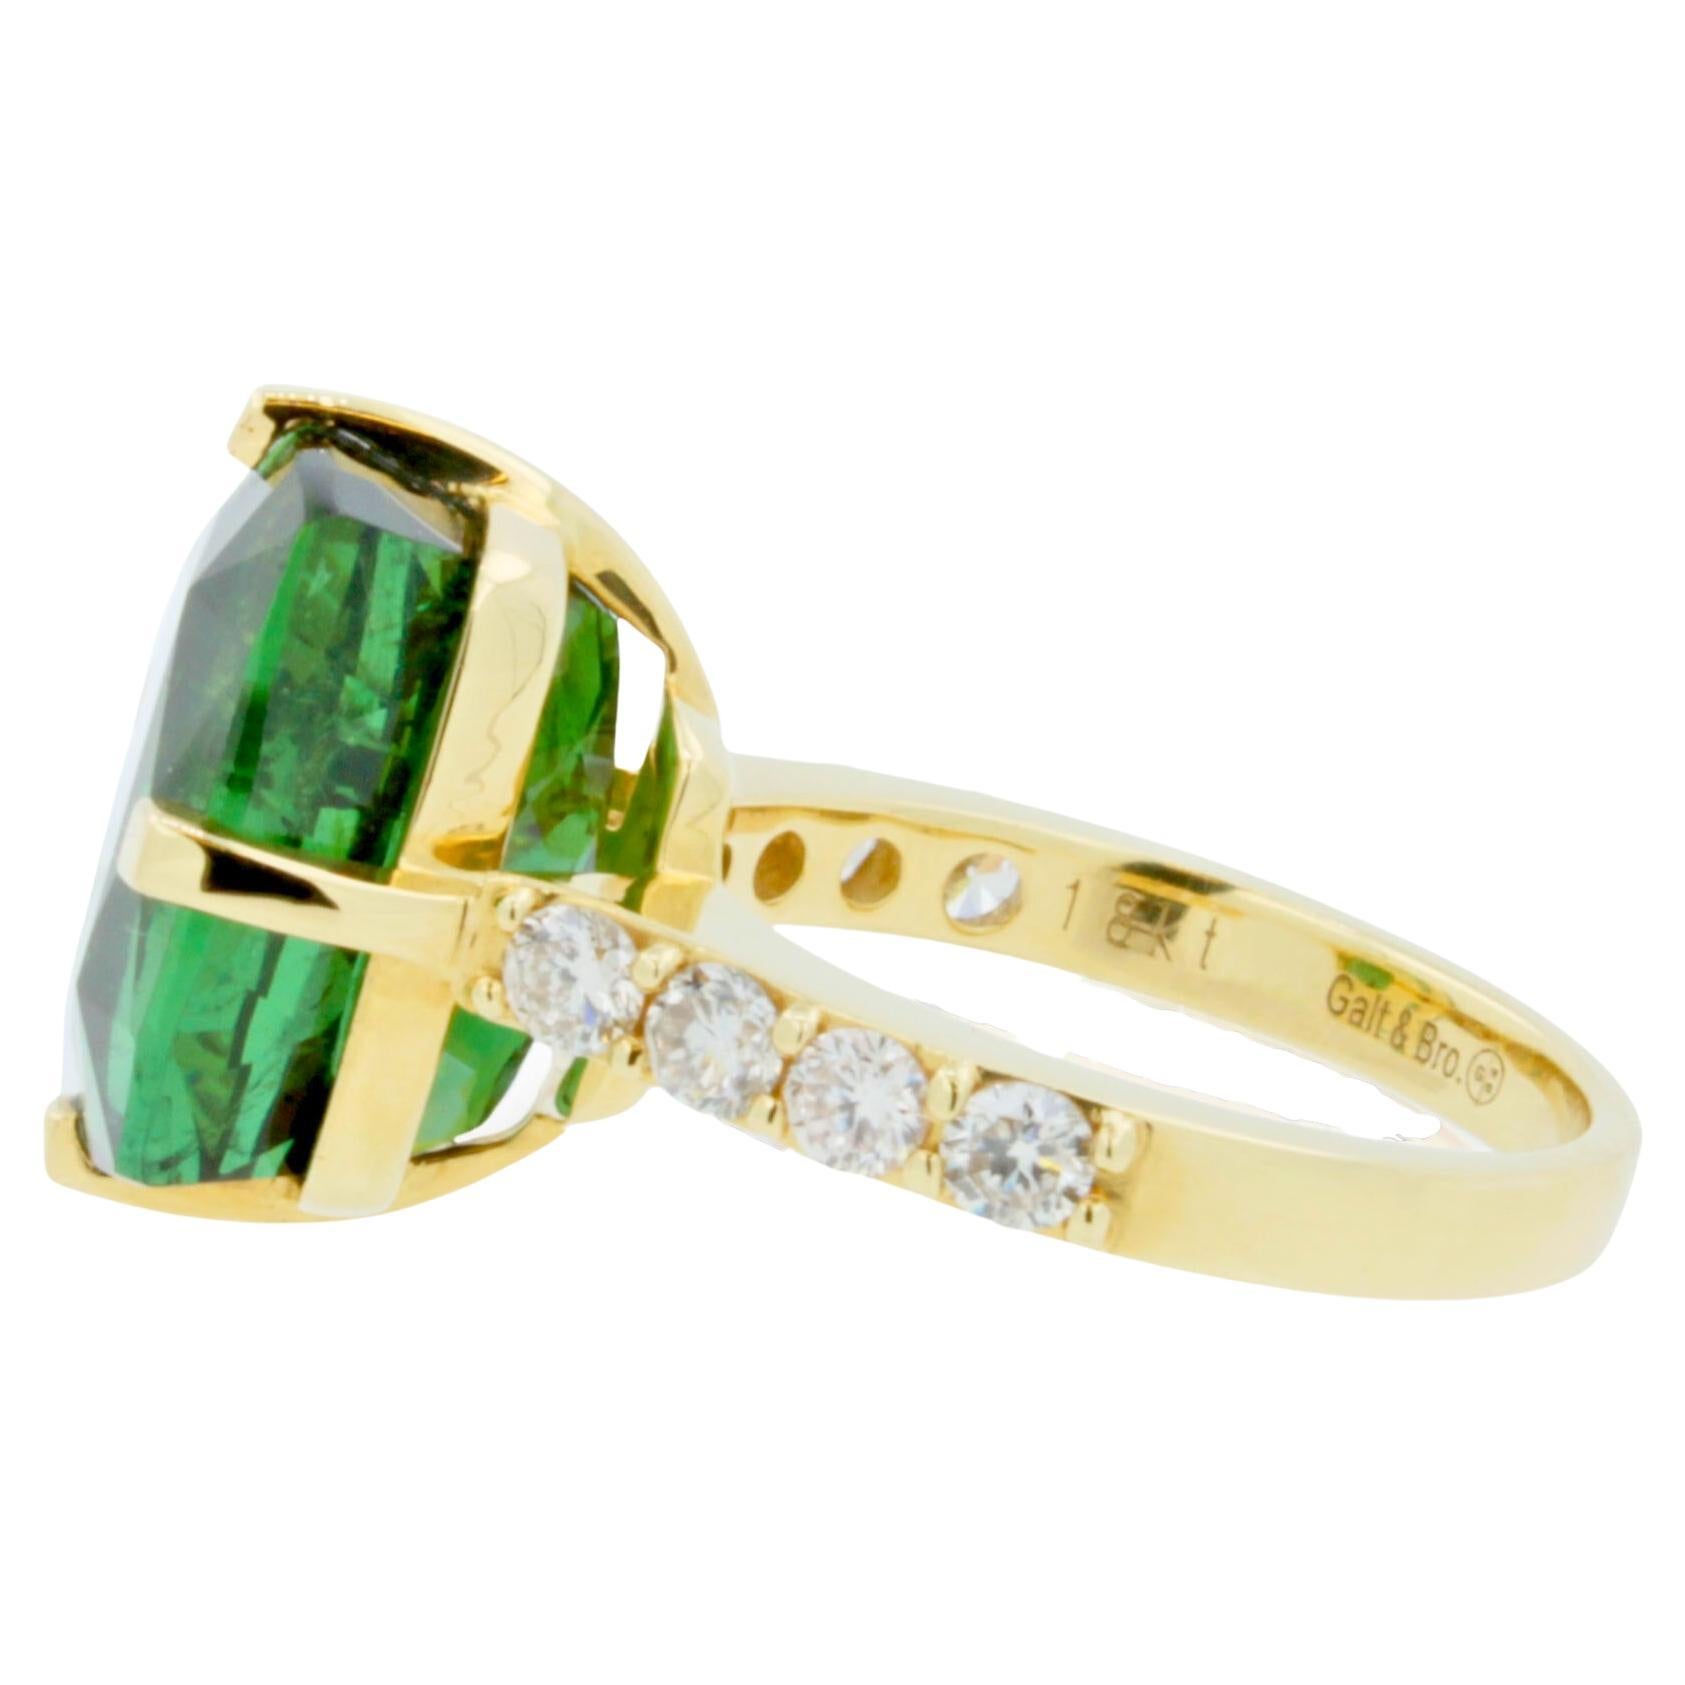 Elongated Cushion Green Tourmaline Diamond Cocktail Solitaire Prongset Gold Ring In New Condition For Sale In Oakton, VA